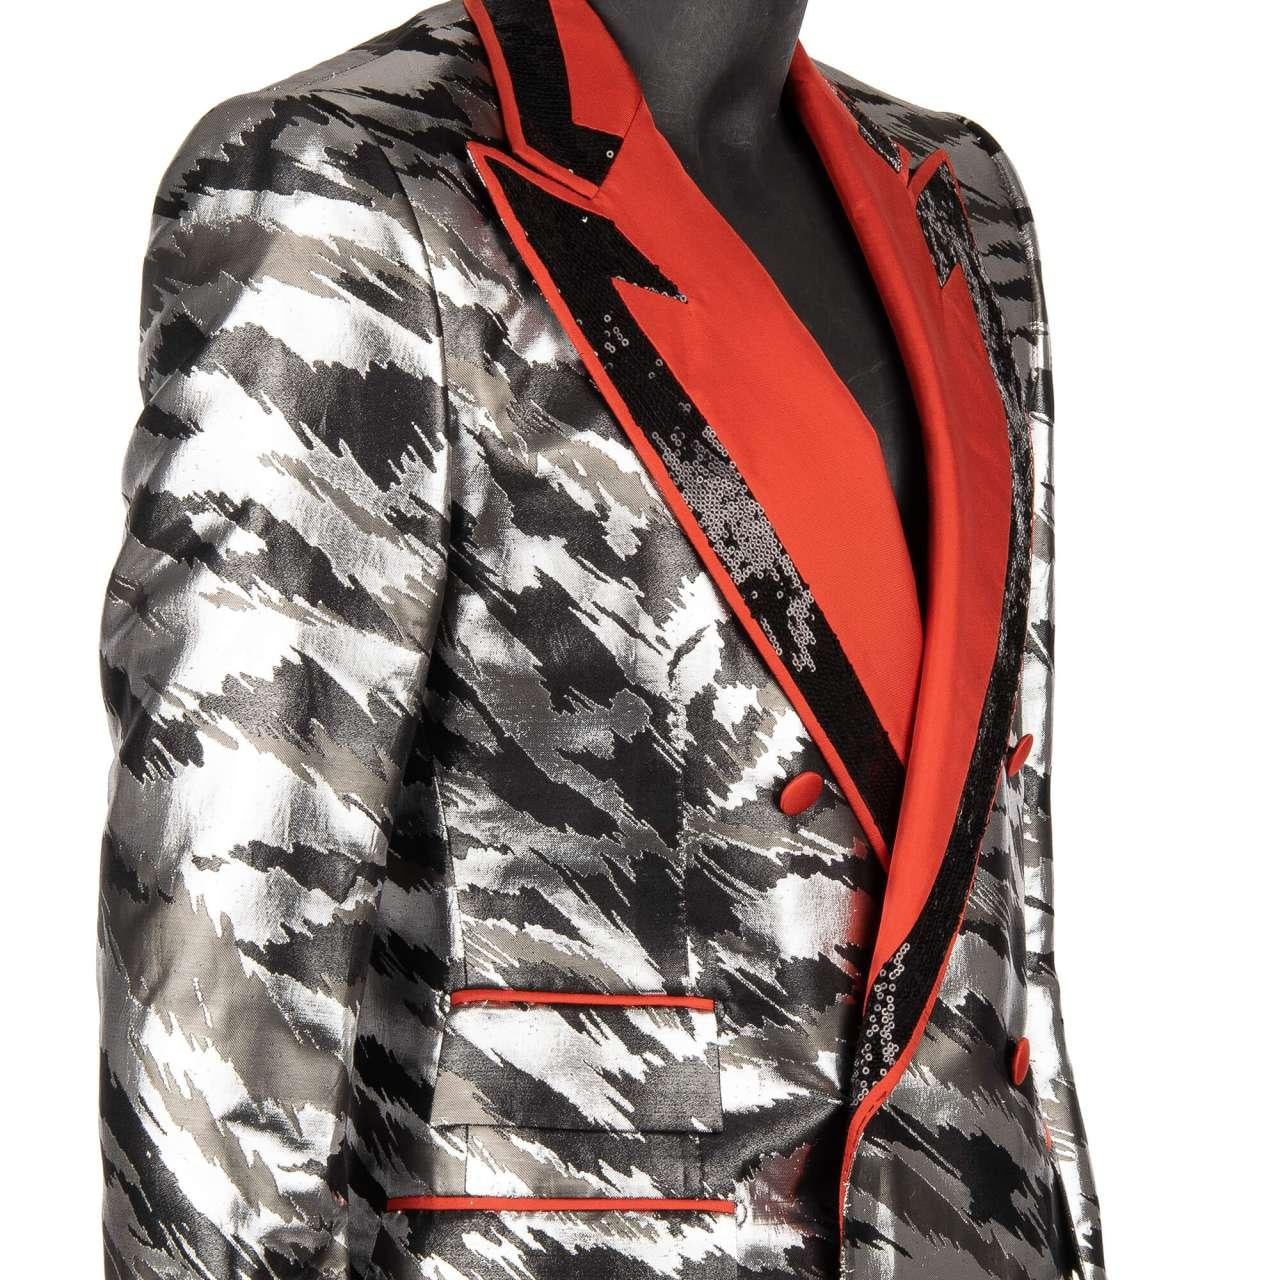 D&G Sequin Jacquard Double breasted Suit Silver Black Red 50 US 40 M L For Sale 2